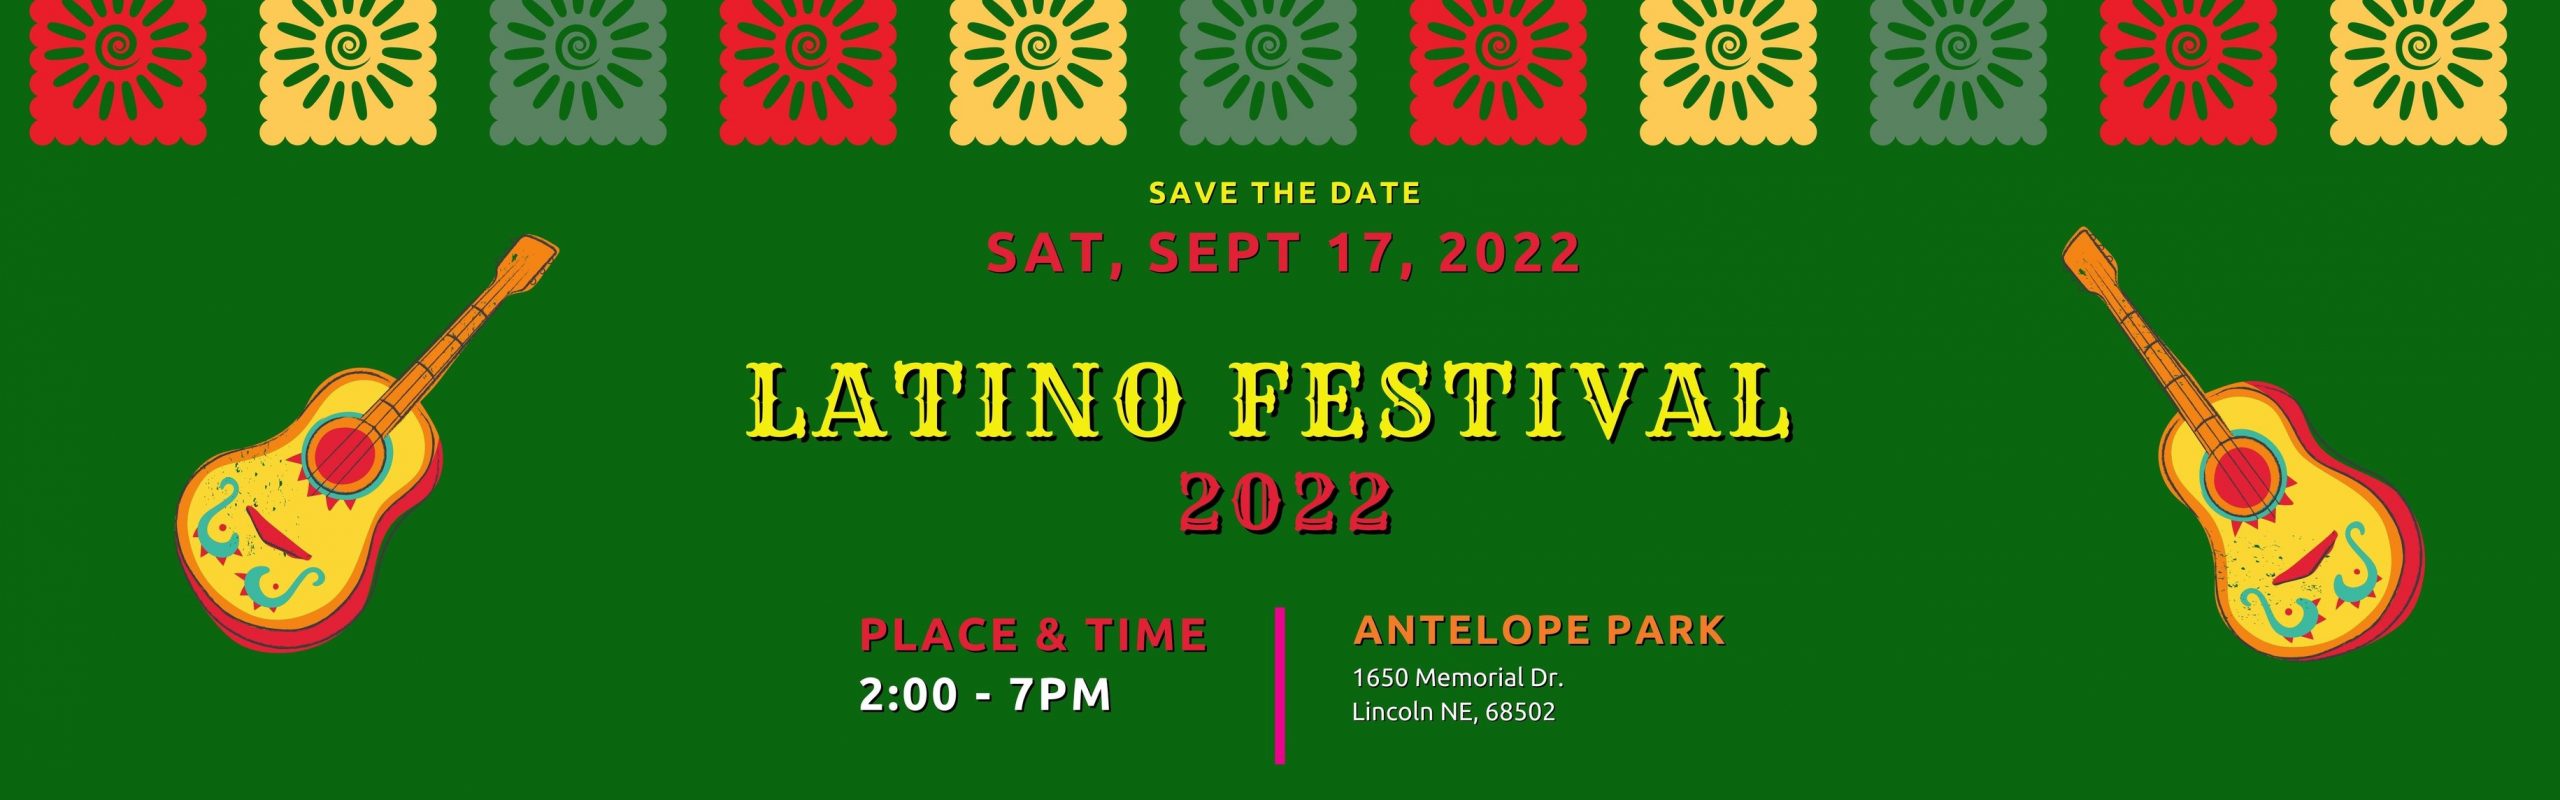 Green background with clipart versions of decorated paper cut-outs and guitars. Text: Save the date Saturday Sept 17, 2022. Latino Festival 2022. Place & Time: 2:00-7pm. Antelope Park 1650 Memorial Dr. Lincoln NE, 68502.